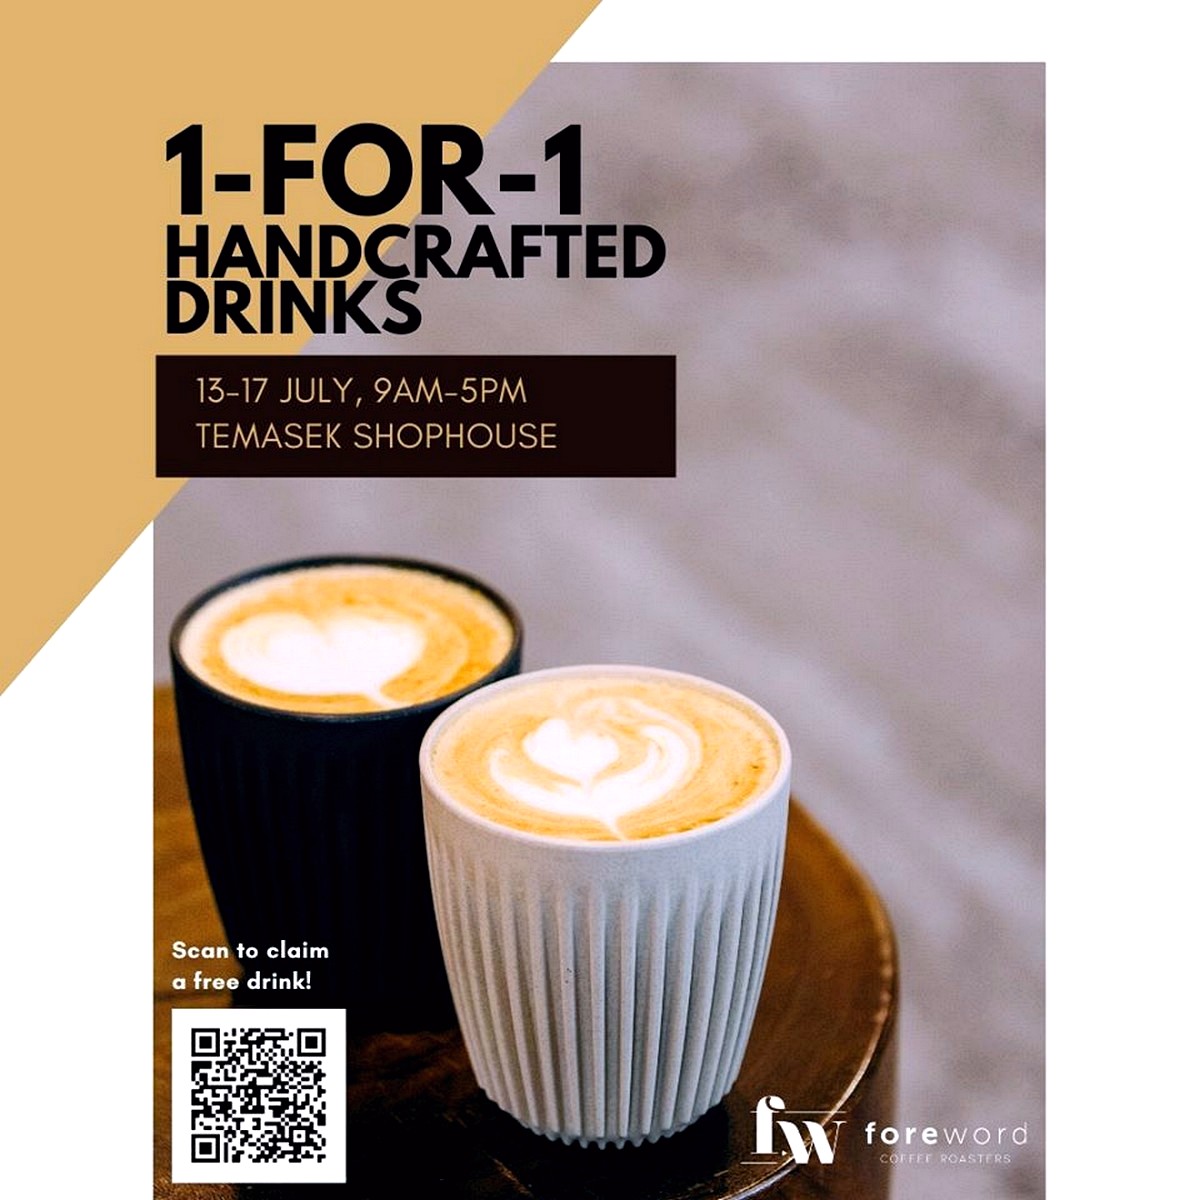 Foreword-Coffee-Roasters-1-for-1-Handcrafted-drink-Promotion-Singapore-2020-Beverages-Offers 13-17 July 2020: Foreword Coffee Roasters 1-For-1 Handcrafted Drinks Promotion